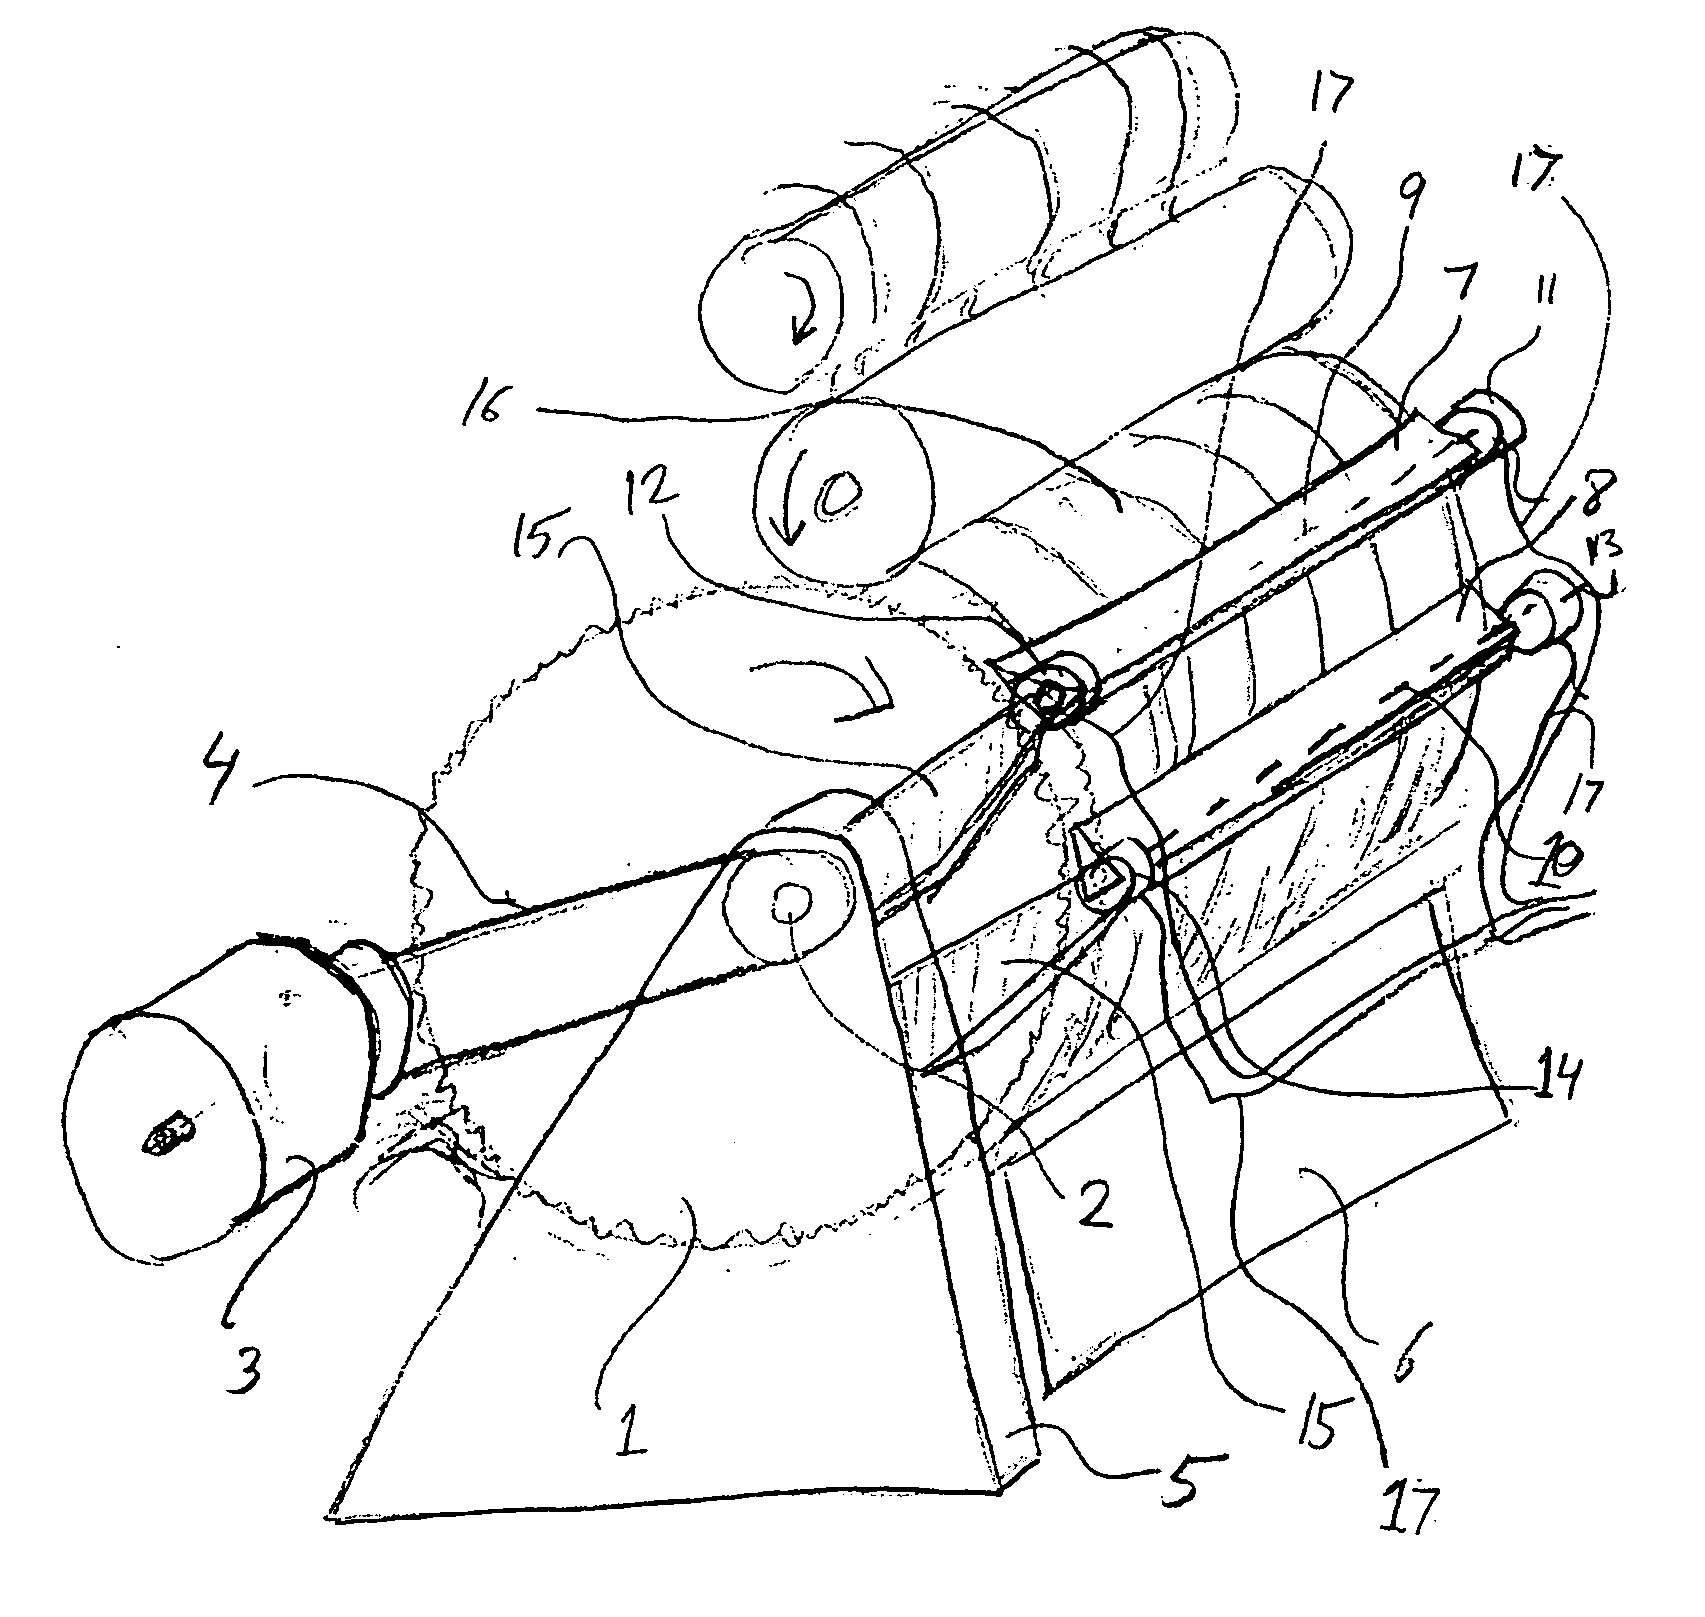 Apparatus and method for controlling the amount of trash in lint